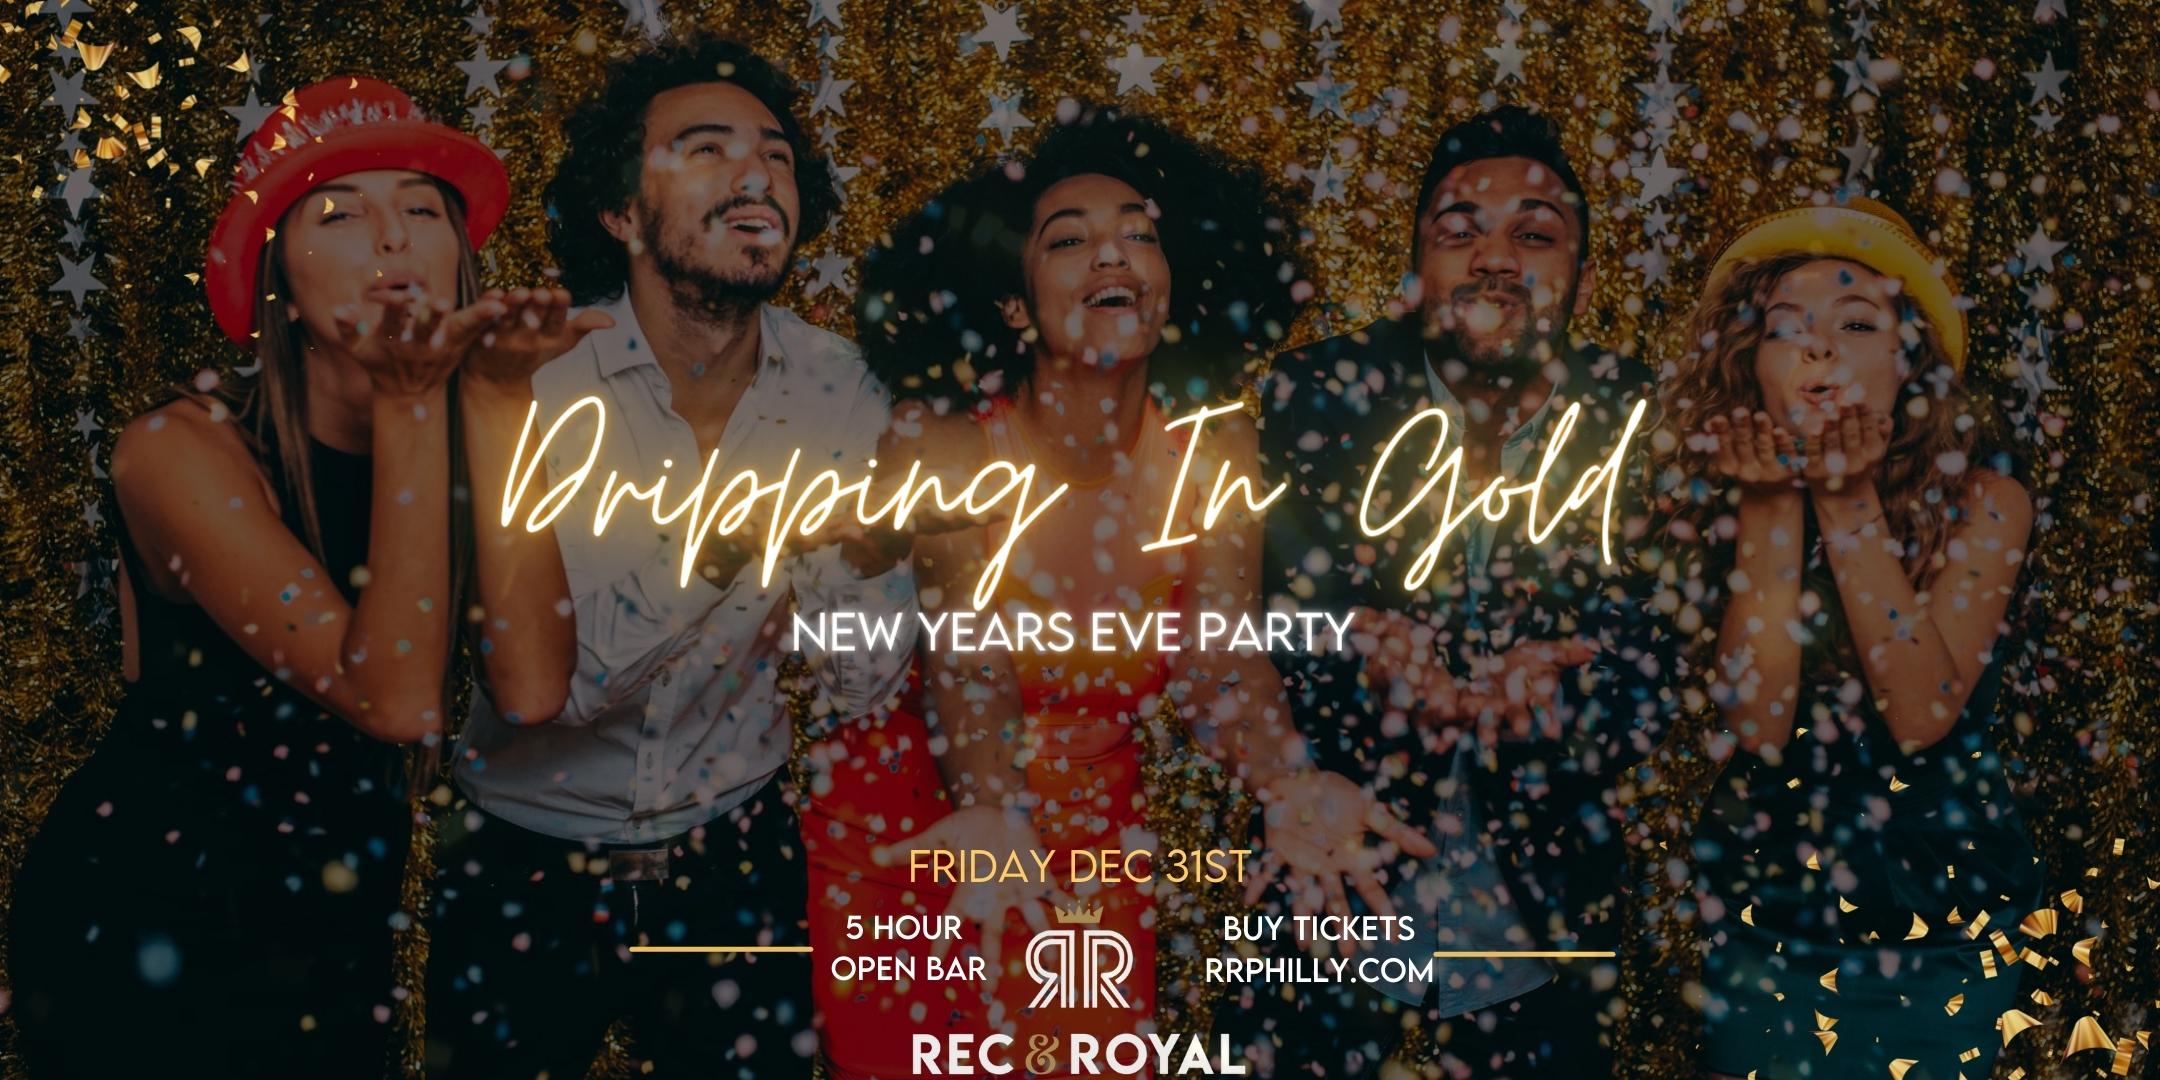 The Best New Year's Eve Event in Philadelphia is at Rec & Royal